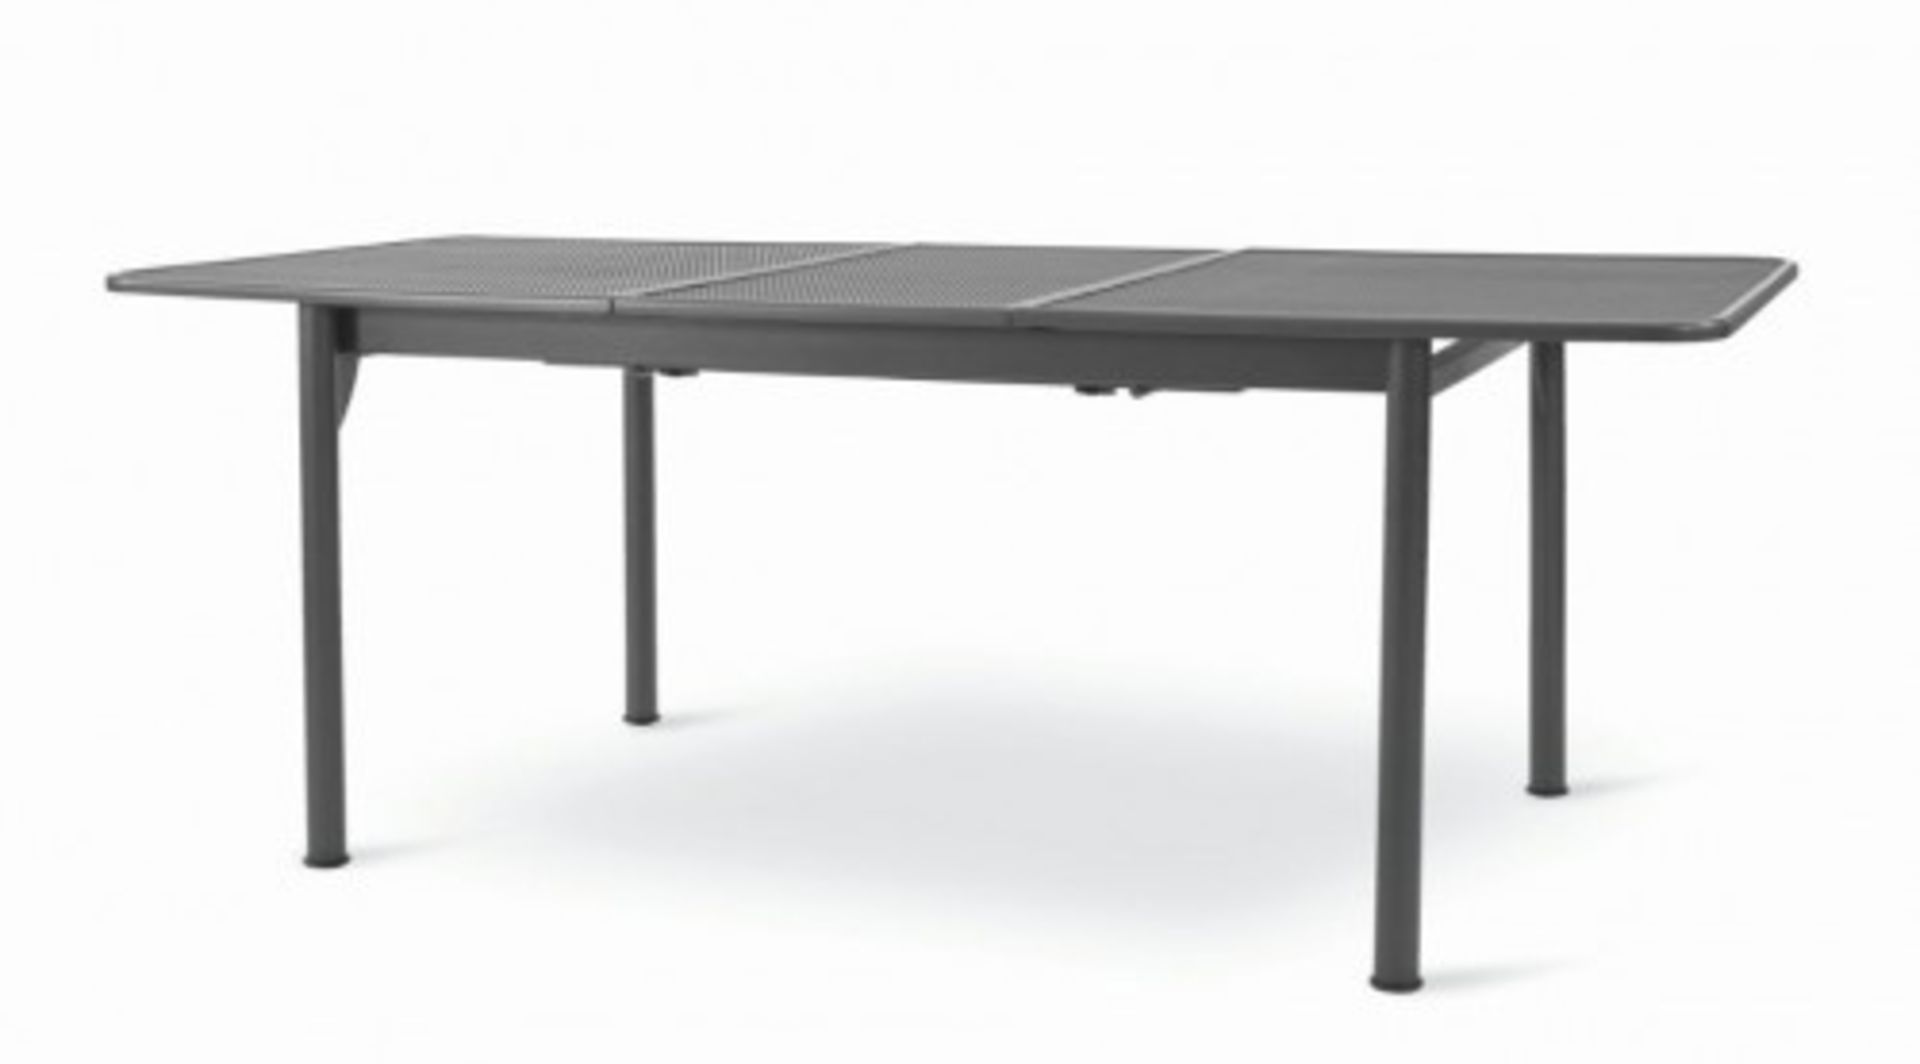 1 x MWH Outdoor Double Extending Garden Table Includes Garden Table and Two Extending Partions